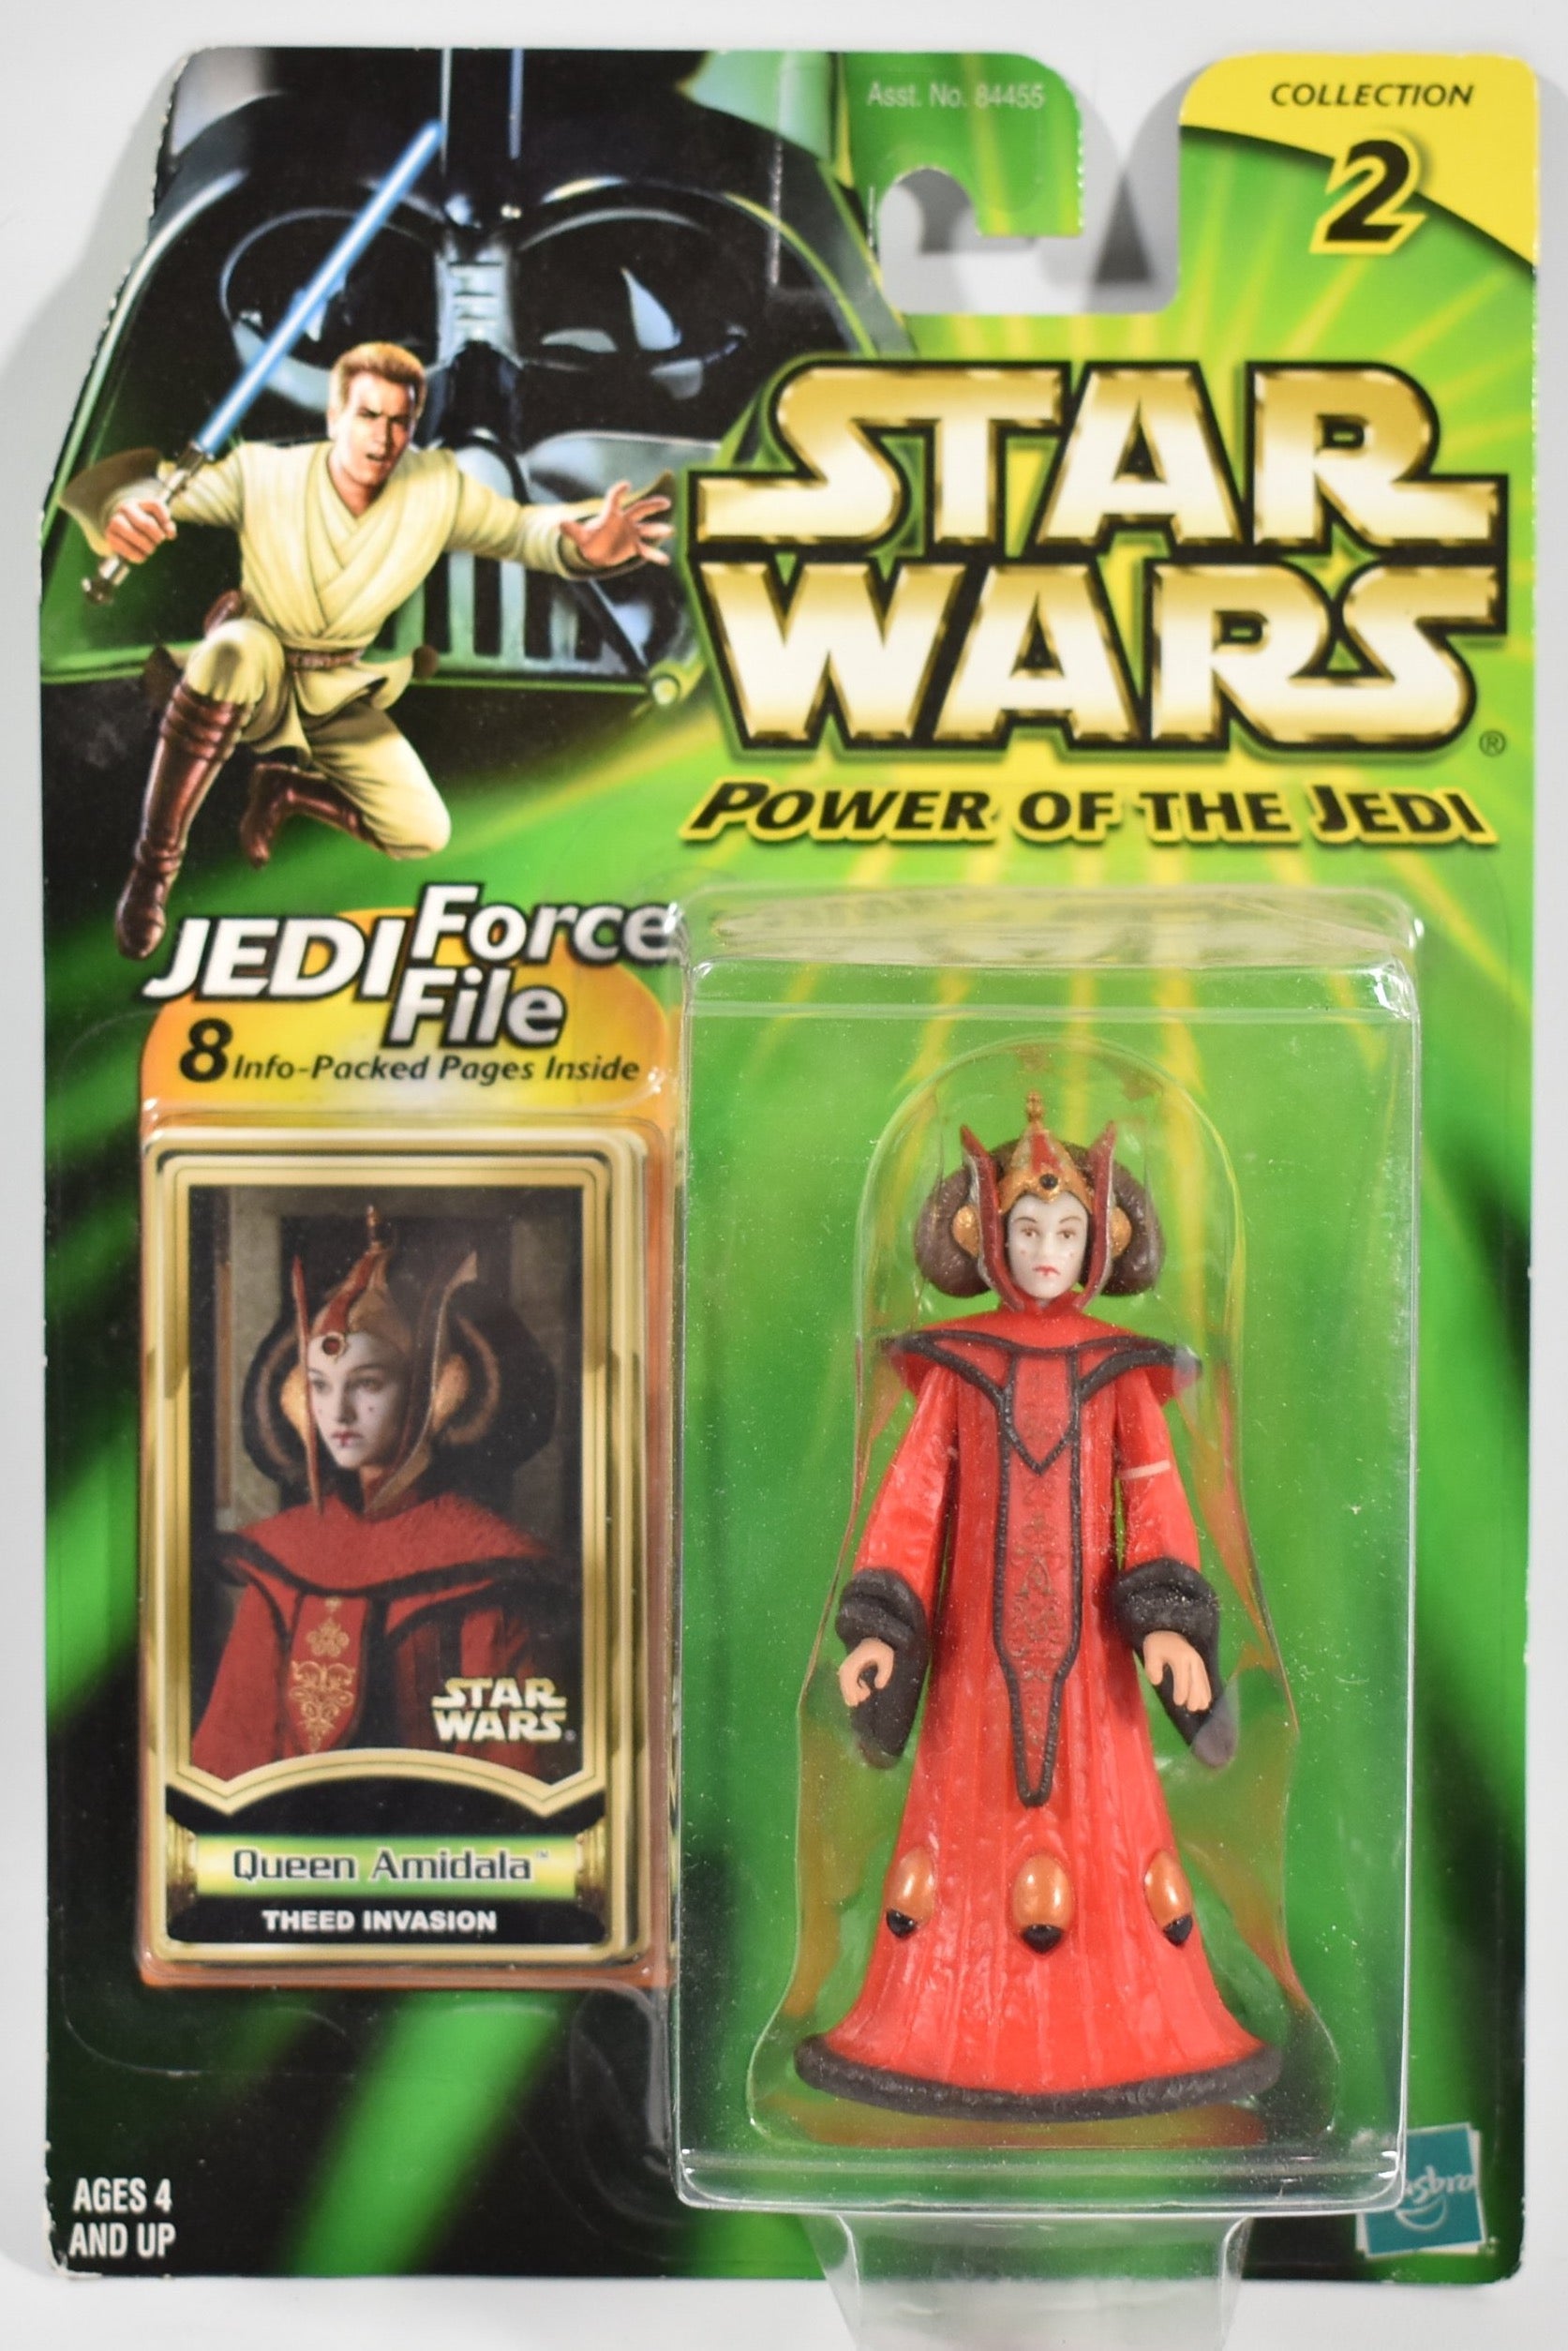 Star Wars Power of the Jedi Action Figure Queen Amidala